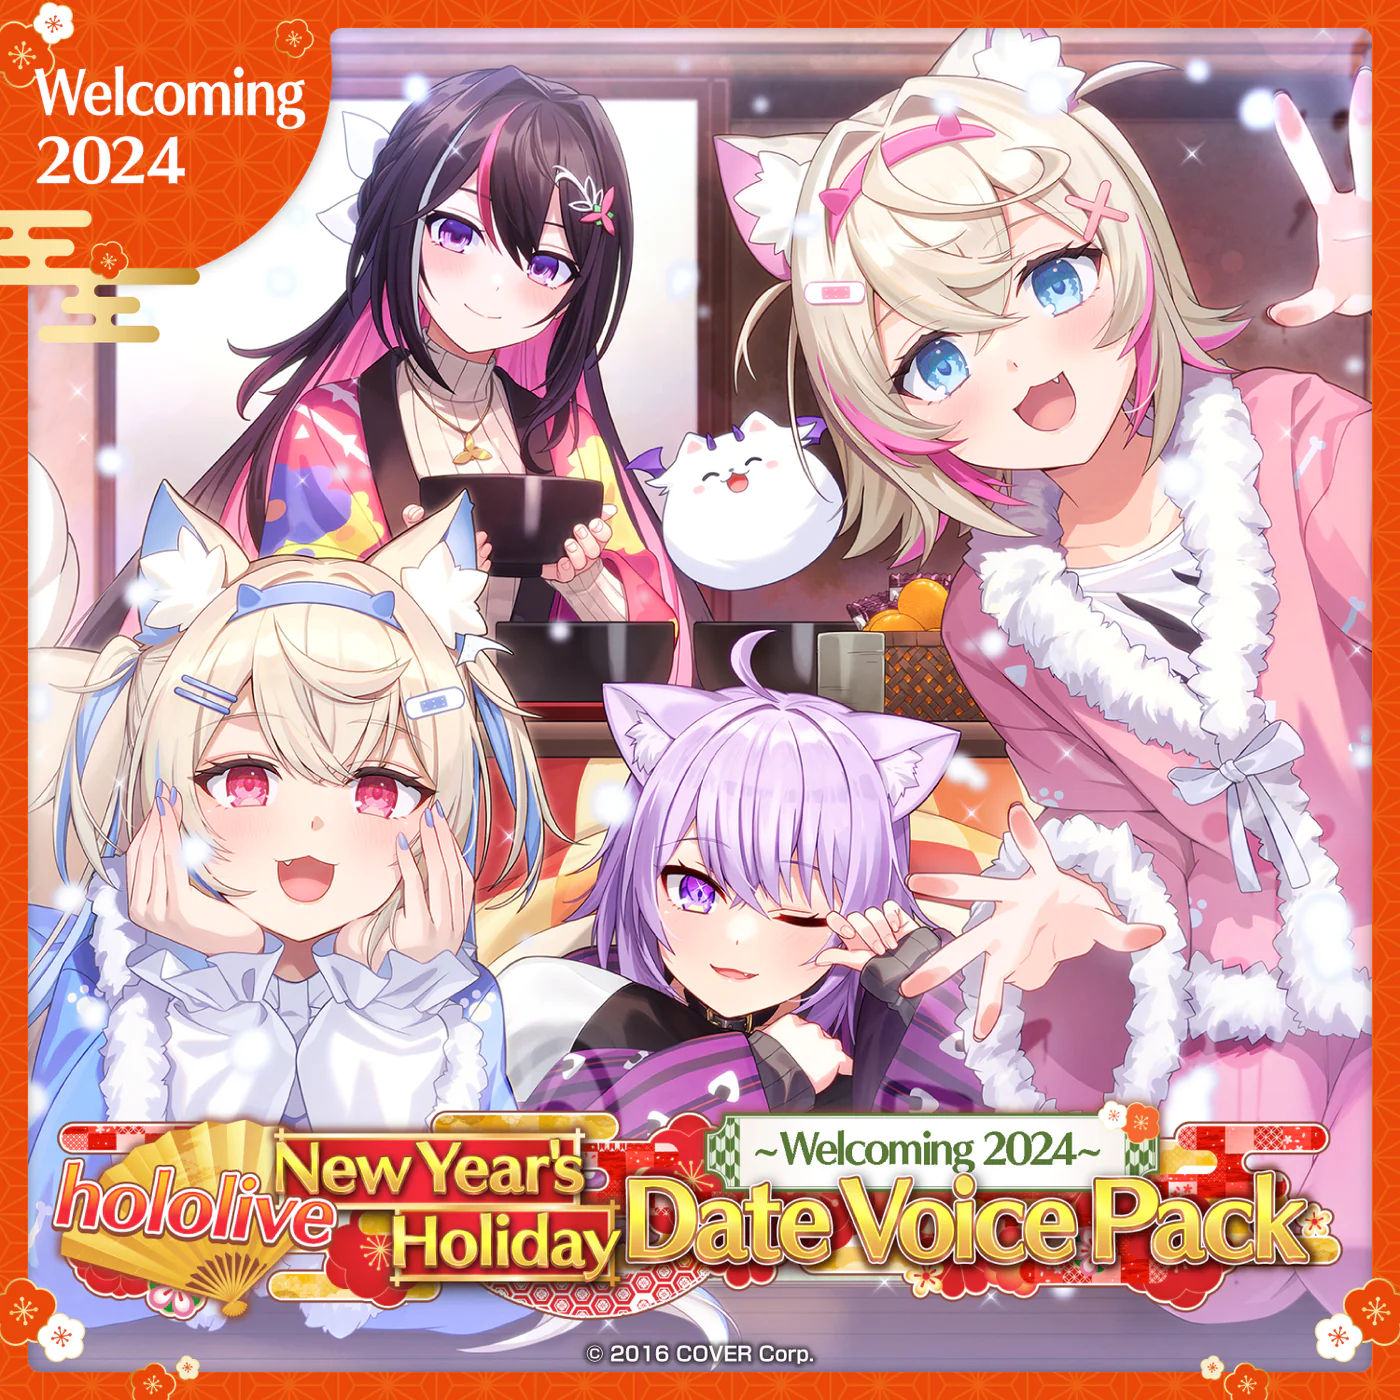 [In Stock] [In Stock] hololive New Year's Holiday Date Voice Pack ~Welcoming 2024~ Indonesia